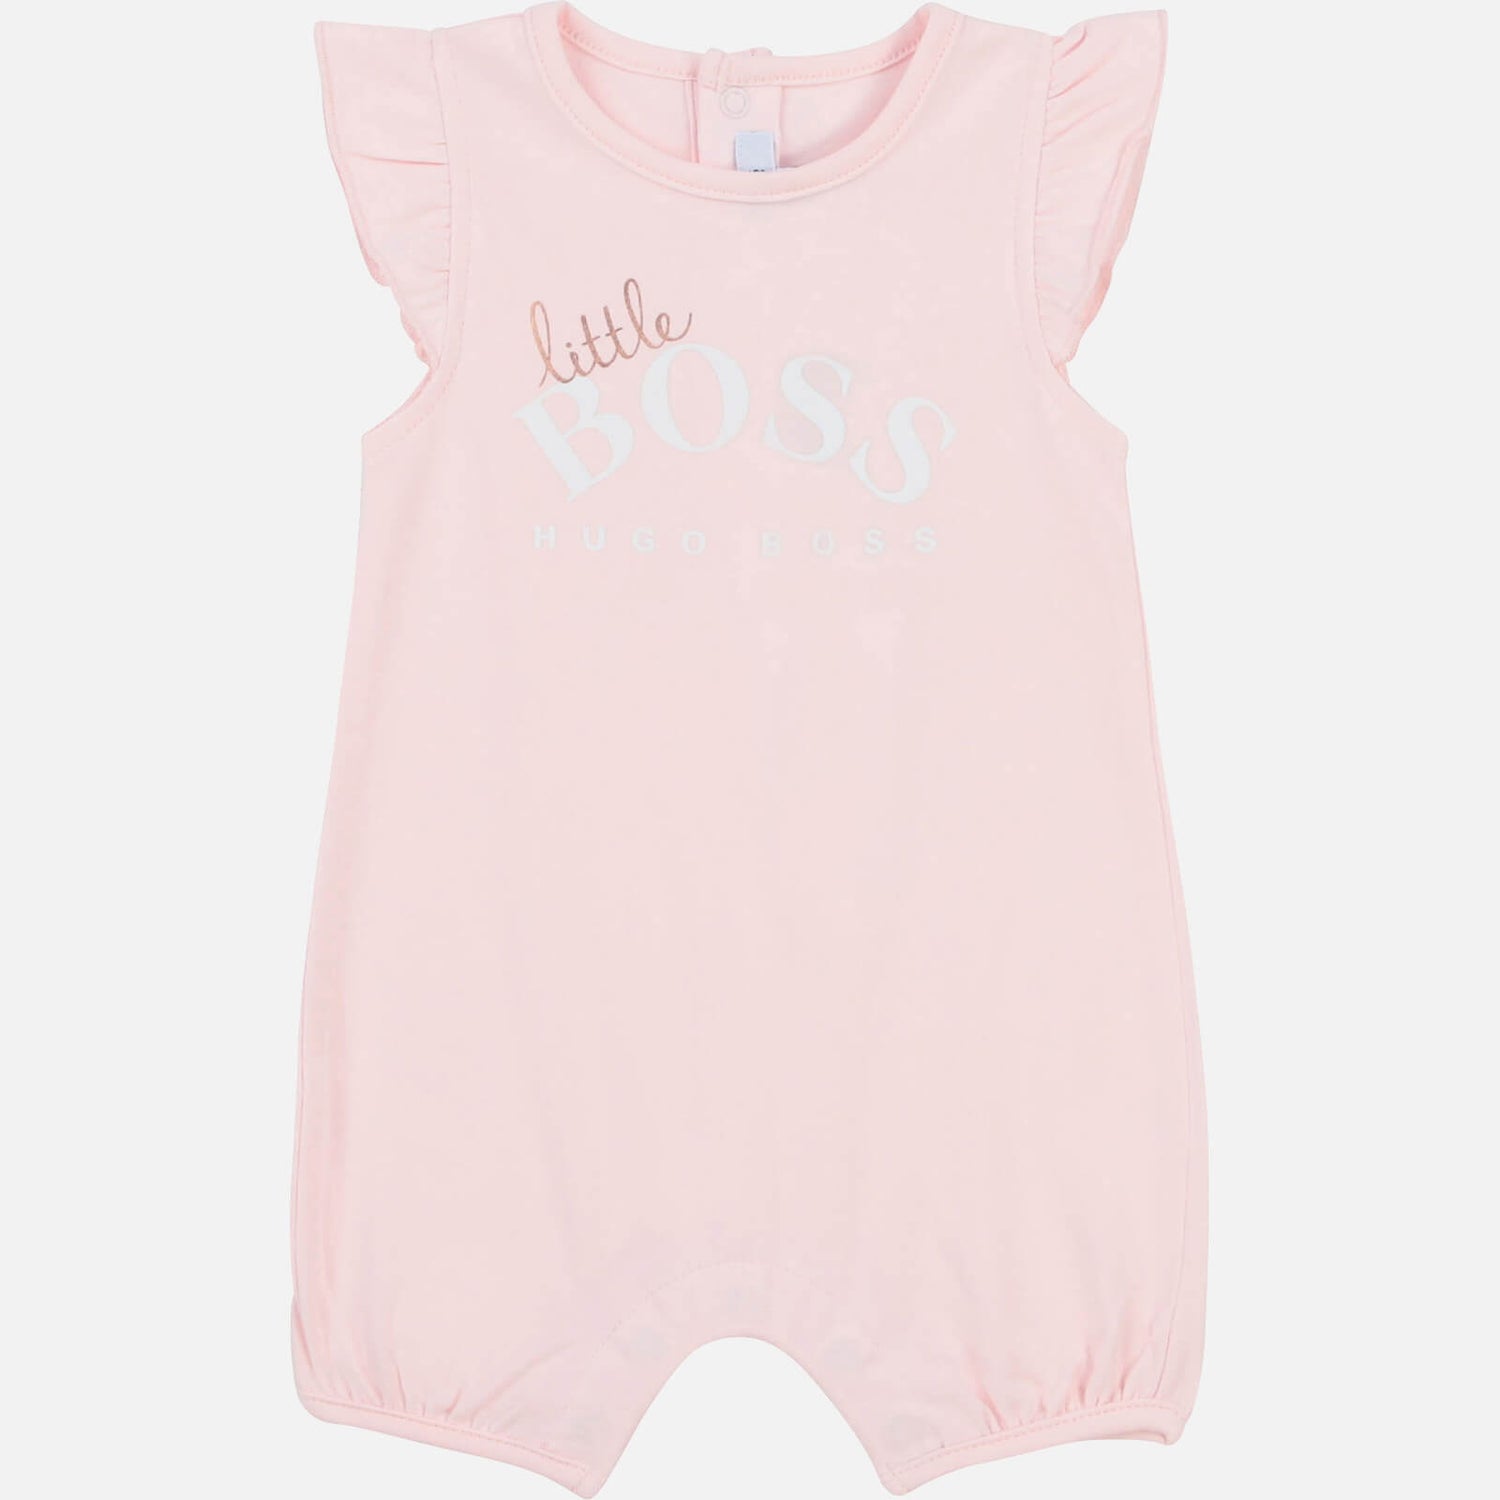 Hugo Boss Baby Girls' All in One Romper - Pale Pink